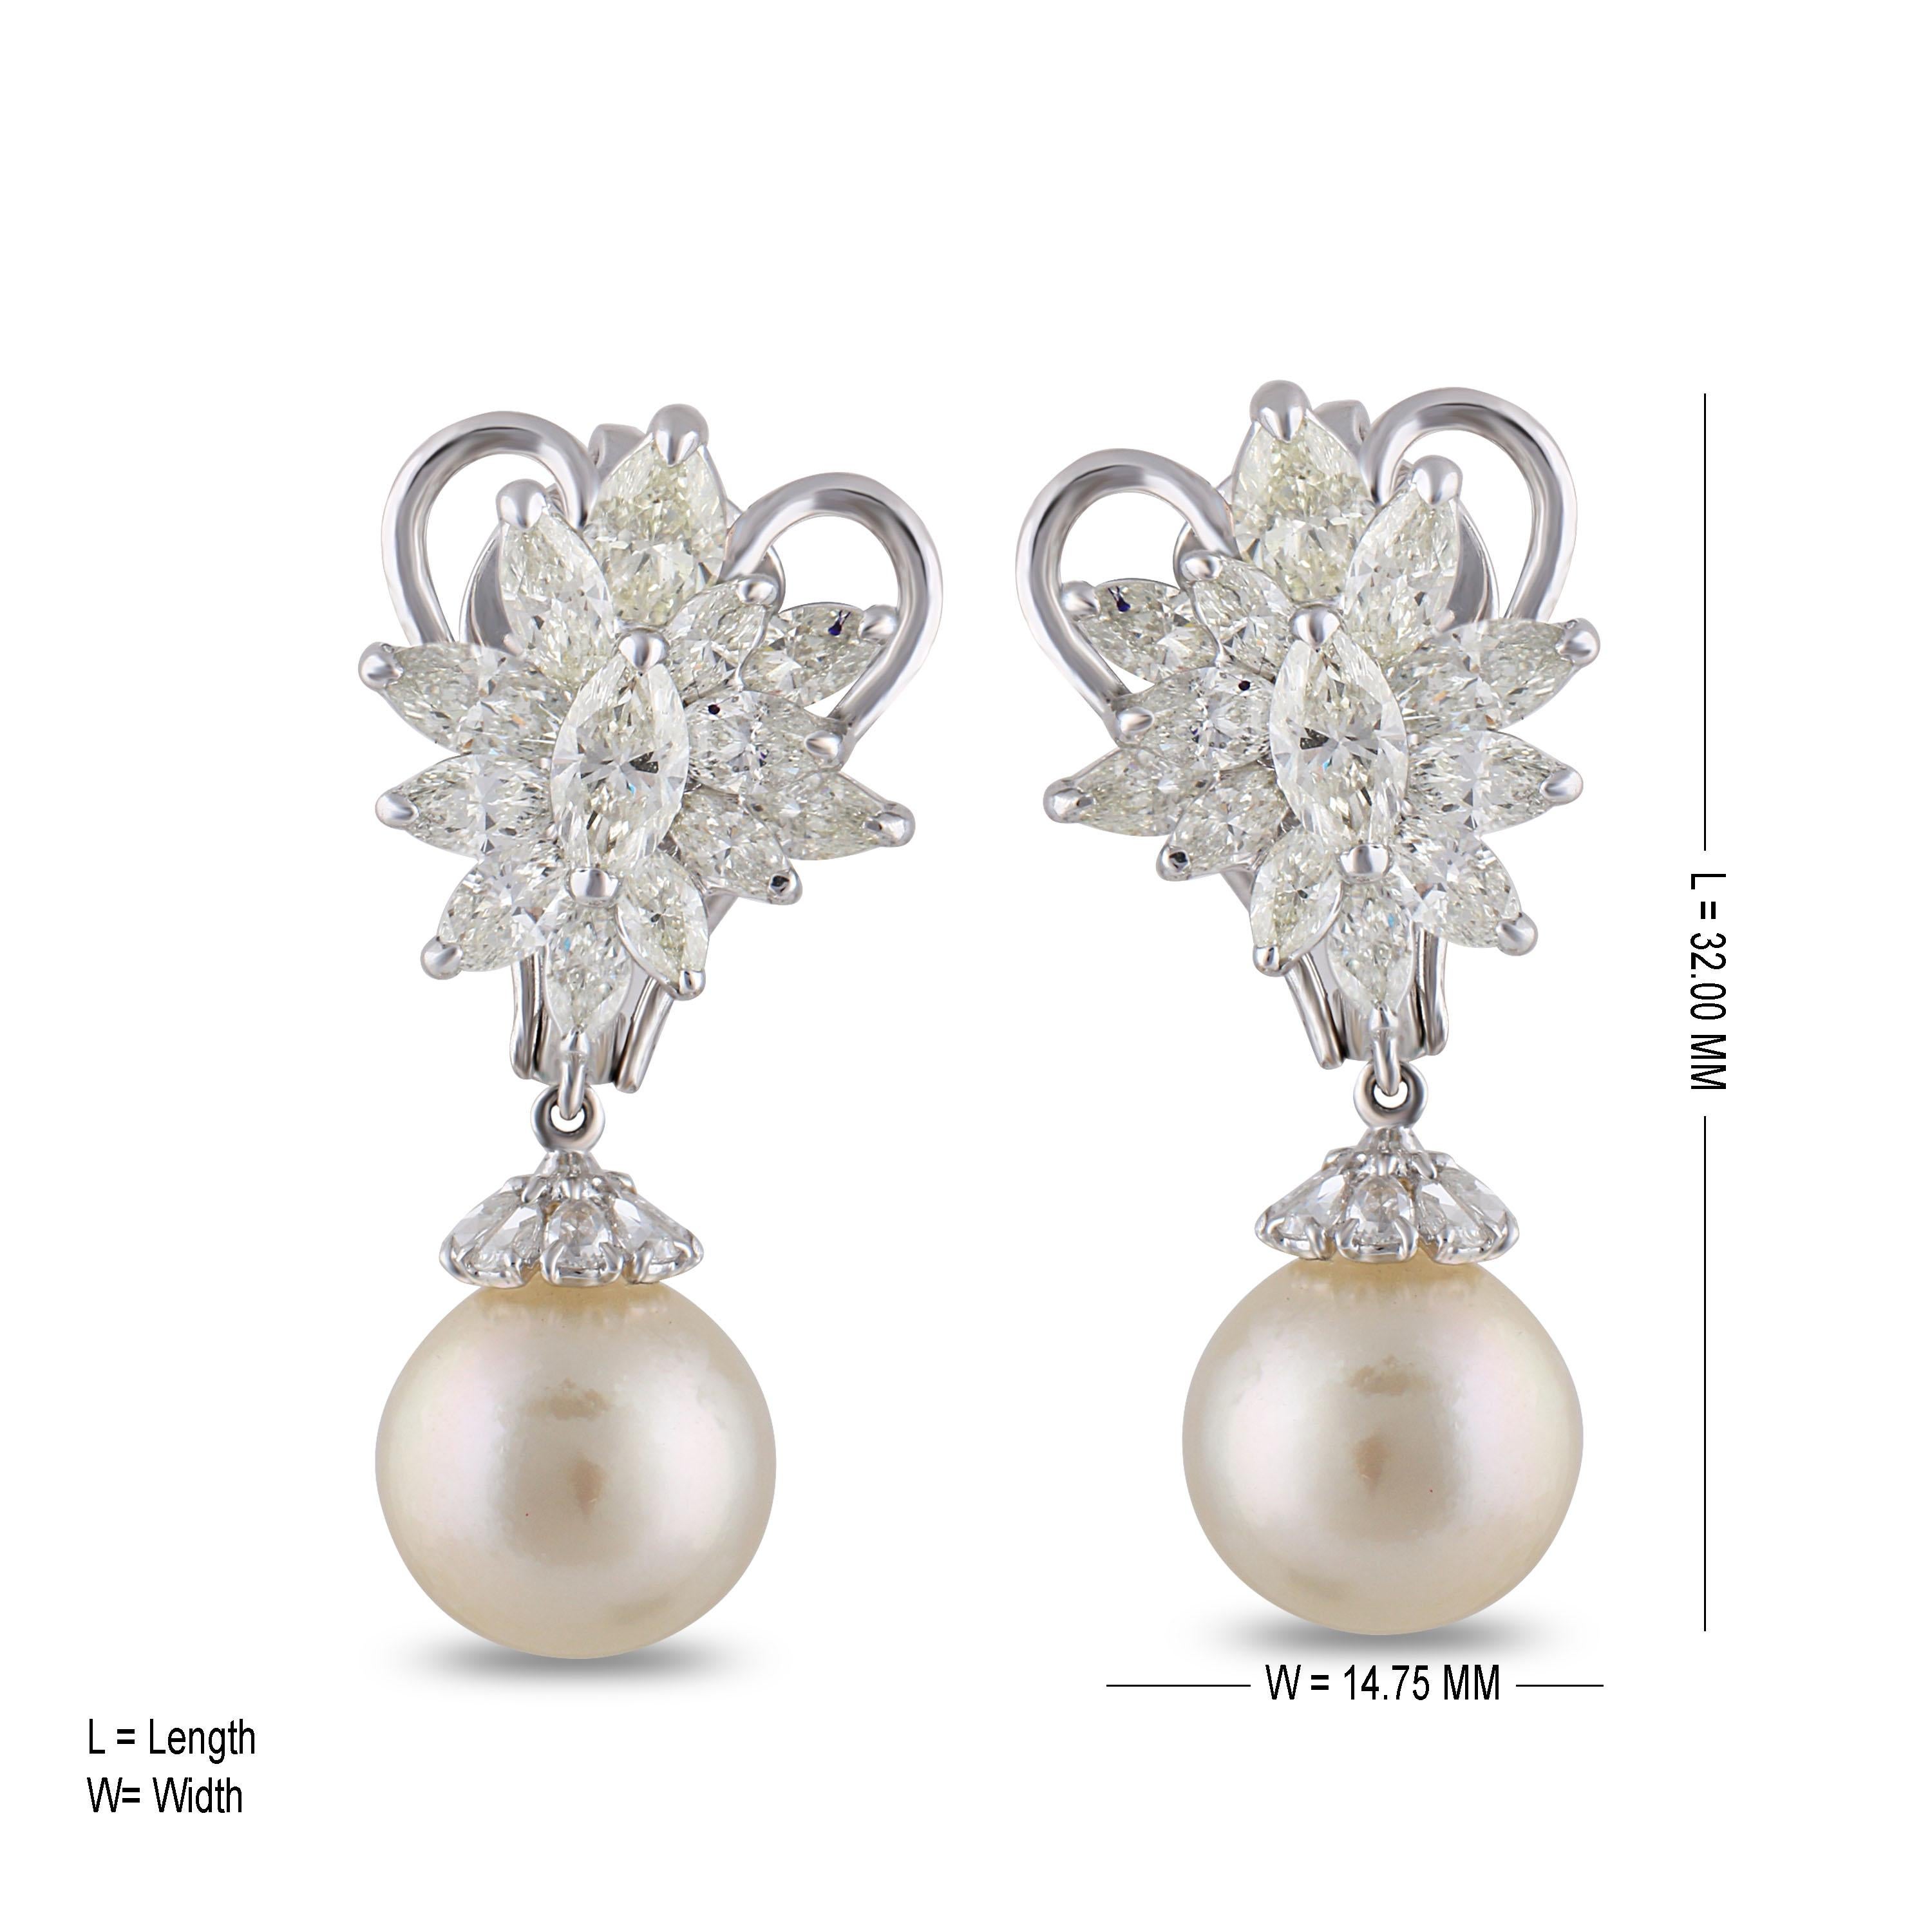 Studio Rêves Diamonds and South Sea Pearl Earrings in 18 Karat White Gold In New Condition For Sale In Mumbai, Maharashtra